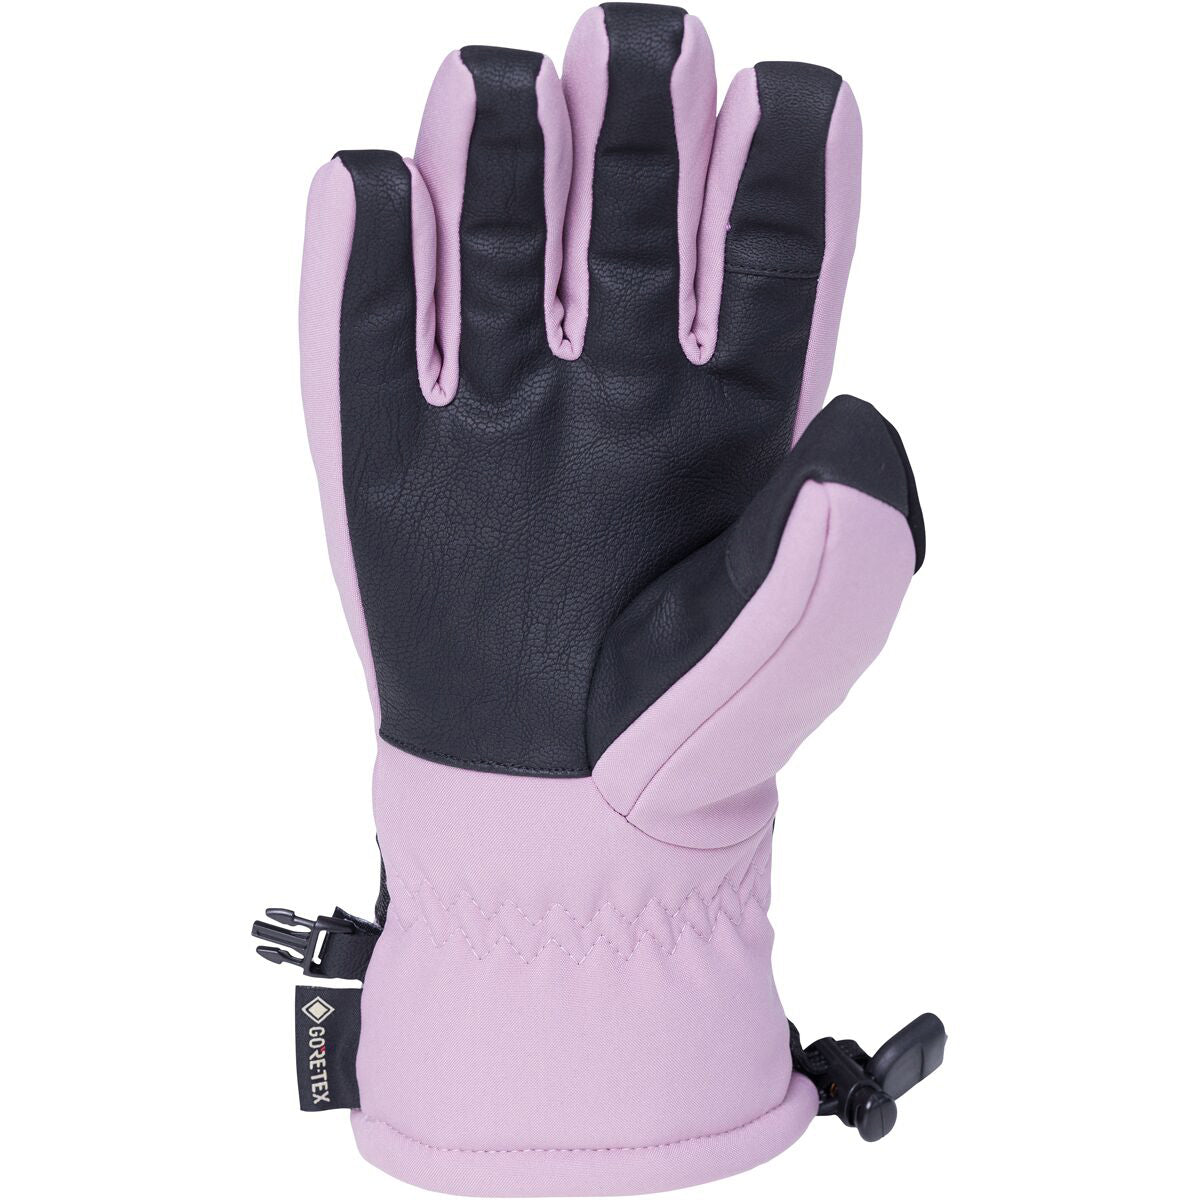 686 Womens Gore-Tex Linear Snowboard Gloves - Dusty Mauve image 2